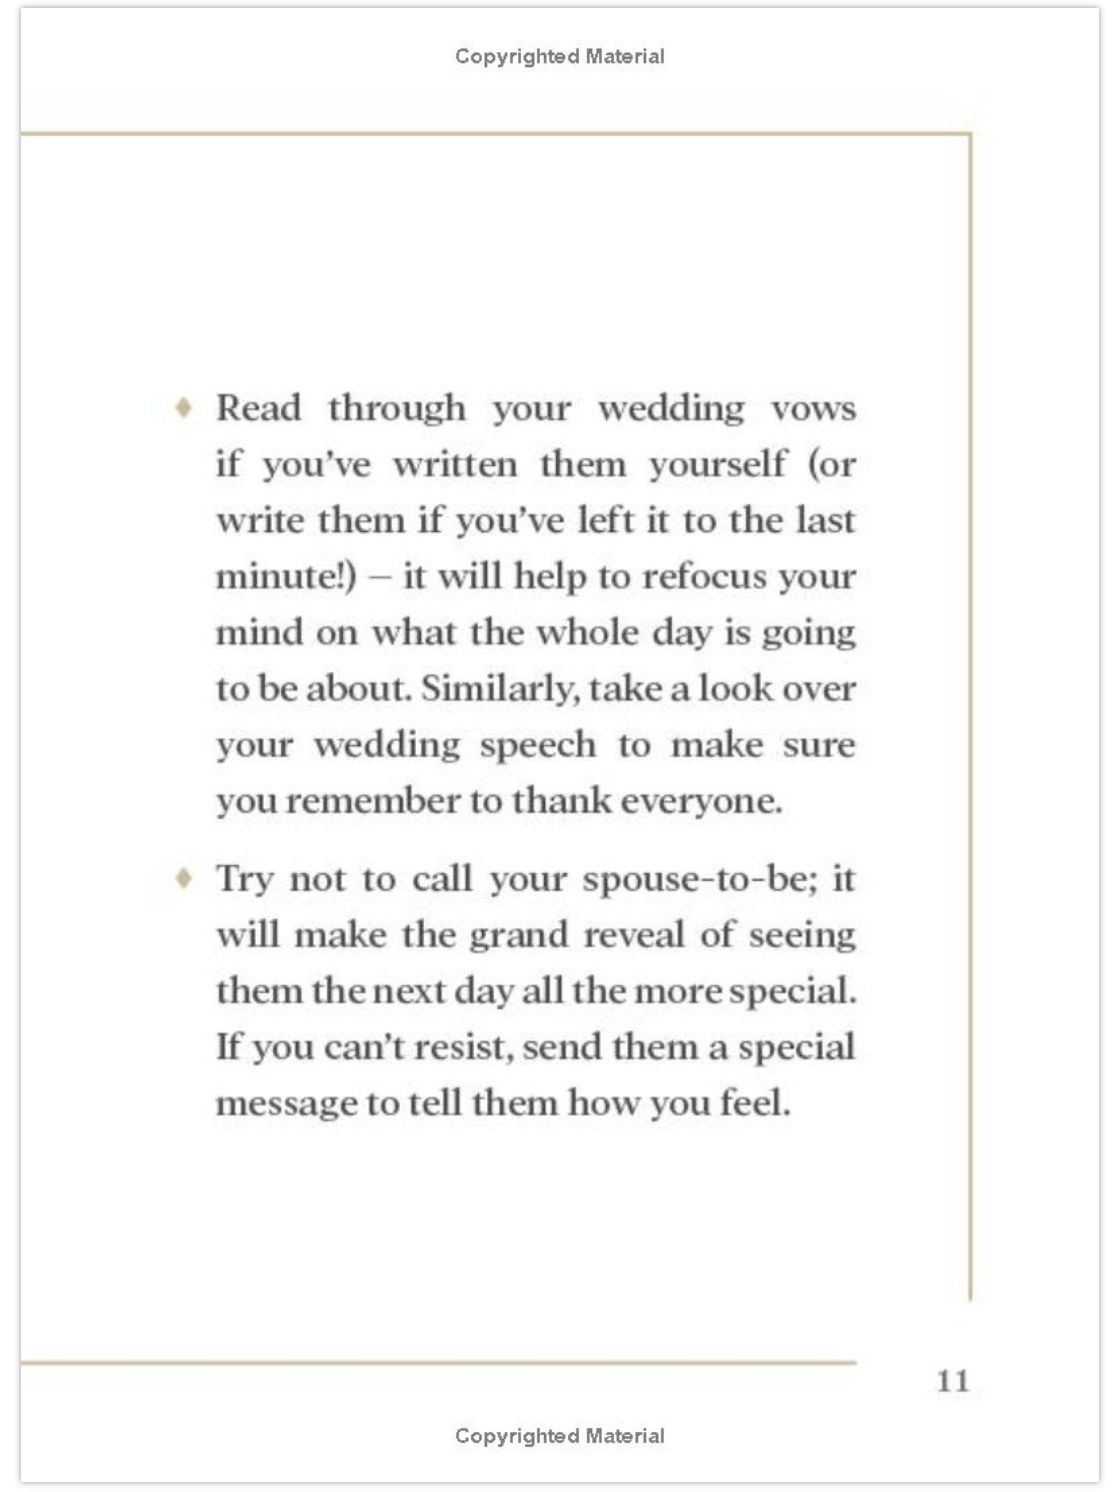 Wedding Tips for Grooms